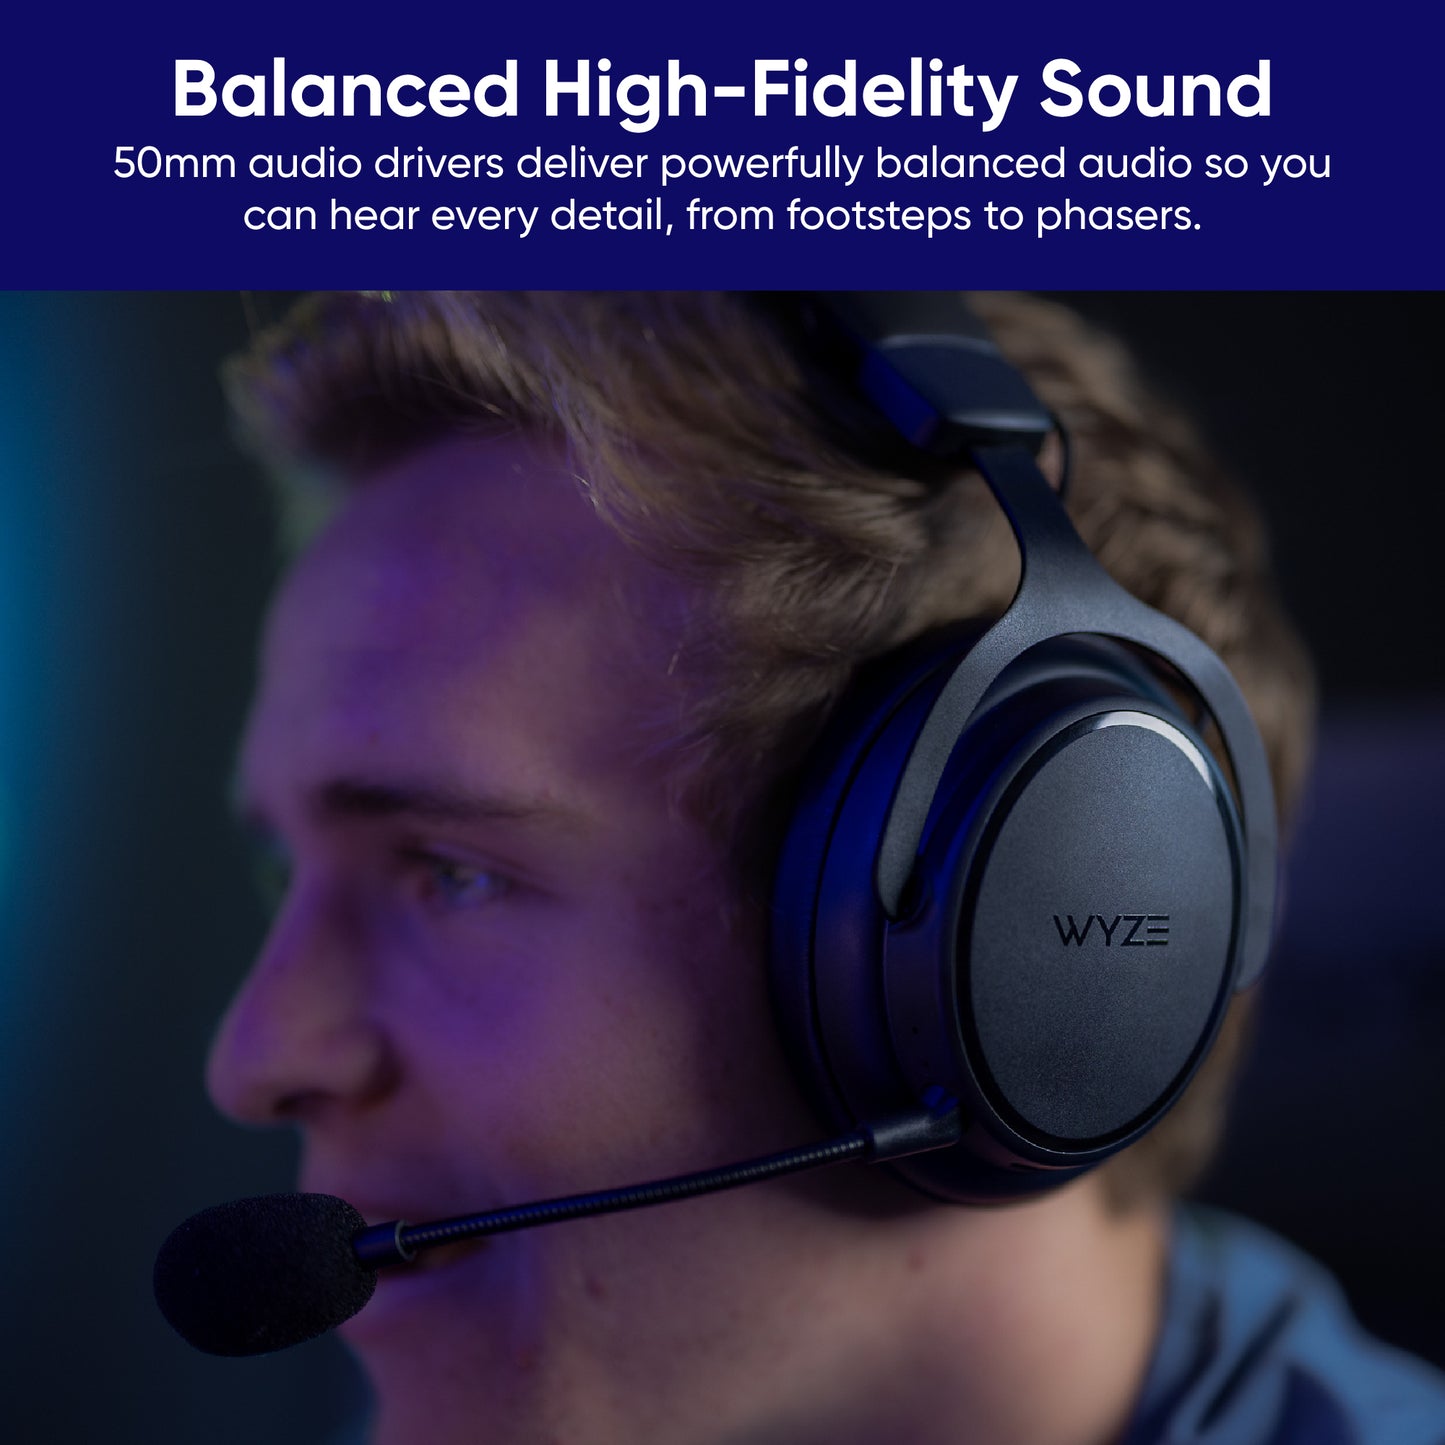 Person wearing gaming headset. Text overlay says"50mm audio drivers deliver powerfully balanced audio so you can hear every detail."